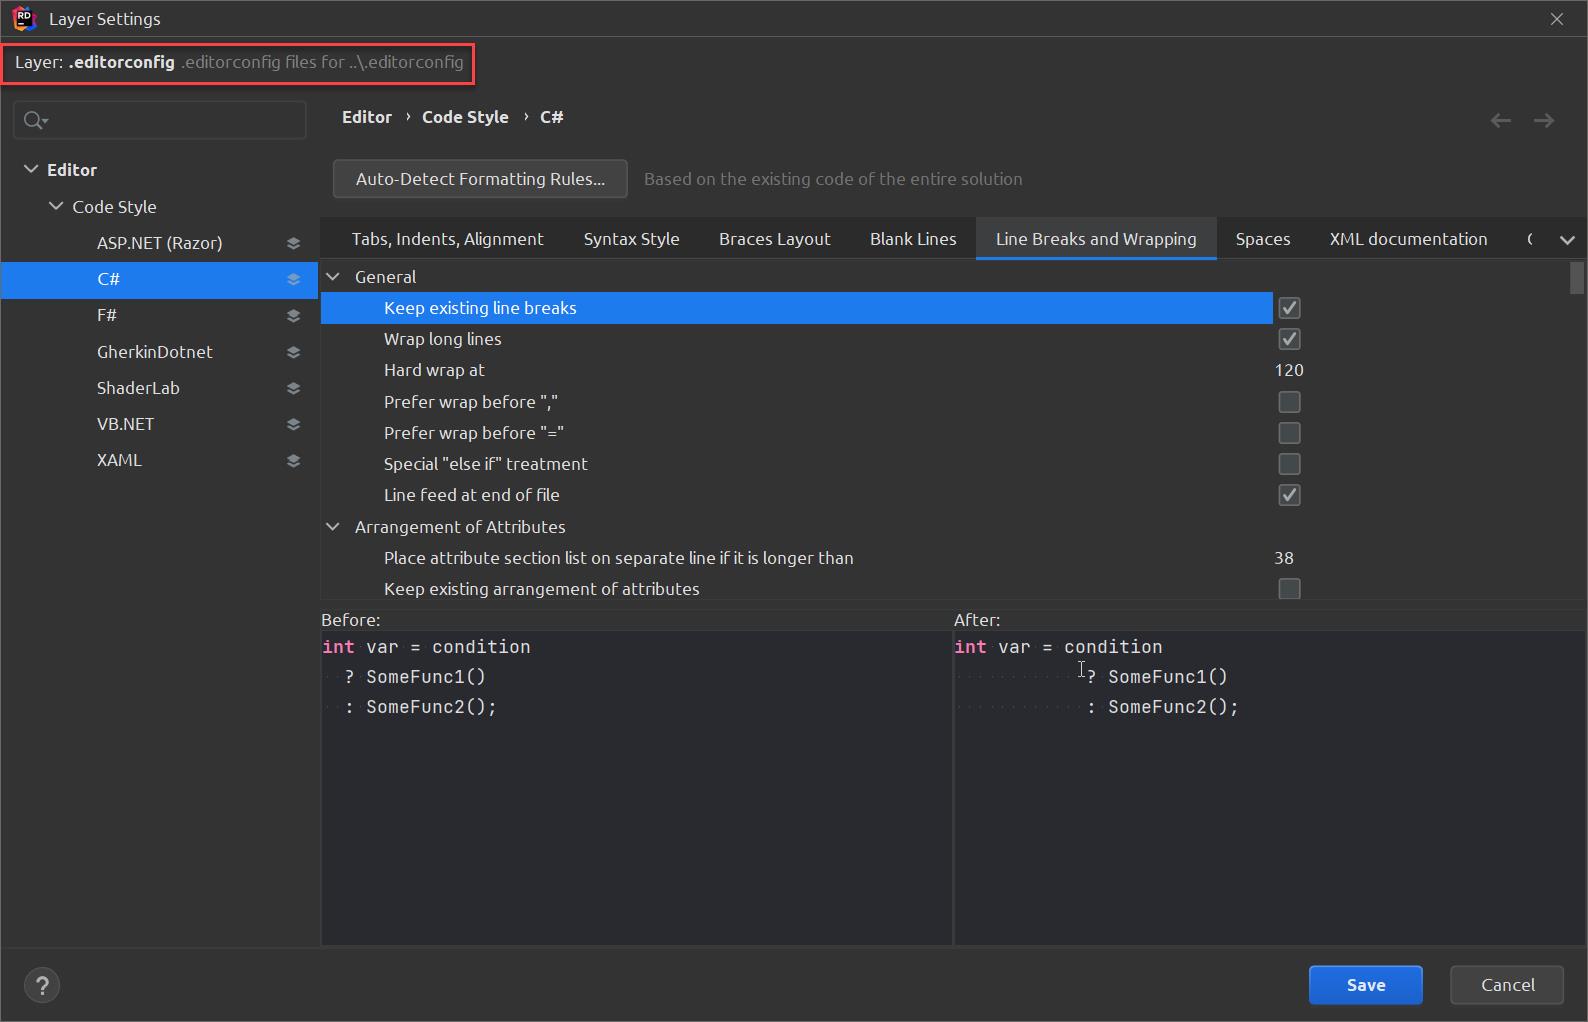 Layer Settings 
Layer: .editorconfig 
.editorconfig files for ..\.editorconfig 
Editor Code Style C# 
x 
v Editor 
v Code Style 
ASP.NET (Razor) 
GherkinDotnet 
ShaderLab 
VB.NET 
XAML 
Auto-Detect Formatting Rules... 
Based on the existing code of the entire solution 
Tabs, Indents, Alignment 
General 
Keep existing line breaks 
Wrap long lines 
Hard wrap at 
Prefer wrap before ", 
Prefer wrap before " 
Syntax Style 
Braces Layout 
Blank Lines 
Line Breaks and Wrapping 
Spaces 
120 
38 
XML documentation 
Special "else if" treatment 
Line feed at end of file 
Arrangement of Attributes 
Place attribute section list on separate line if it is longer than 
Keep existing arrangement of attributes 
Before: 
= condition 
int var 
? SomeFunc1() 
. SomeFunc2(); 
After: 
int var 
= condition 
1 
? SomeFunc1() 
. SomeFunc2(); 
Save 
Cancel 